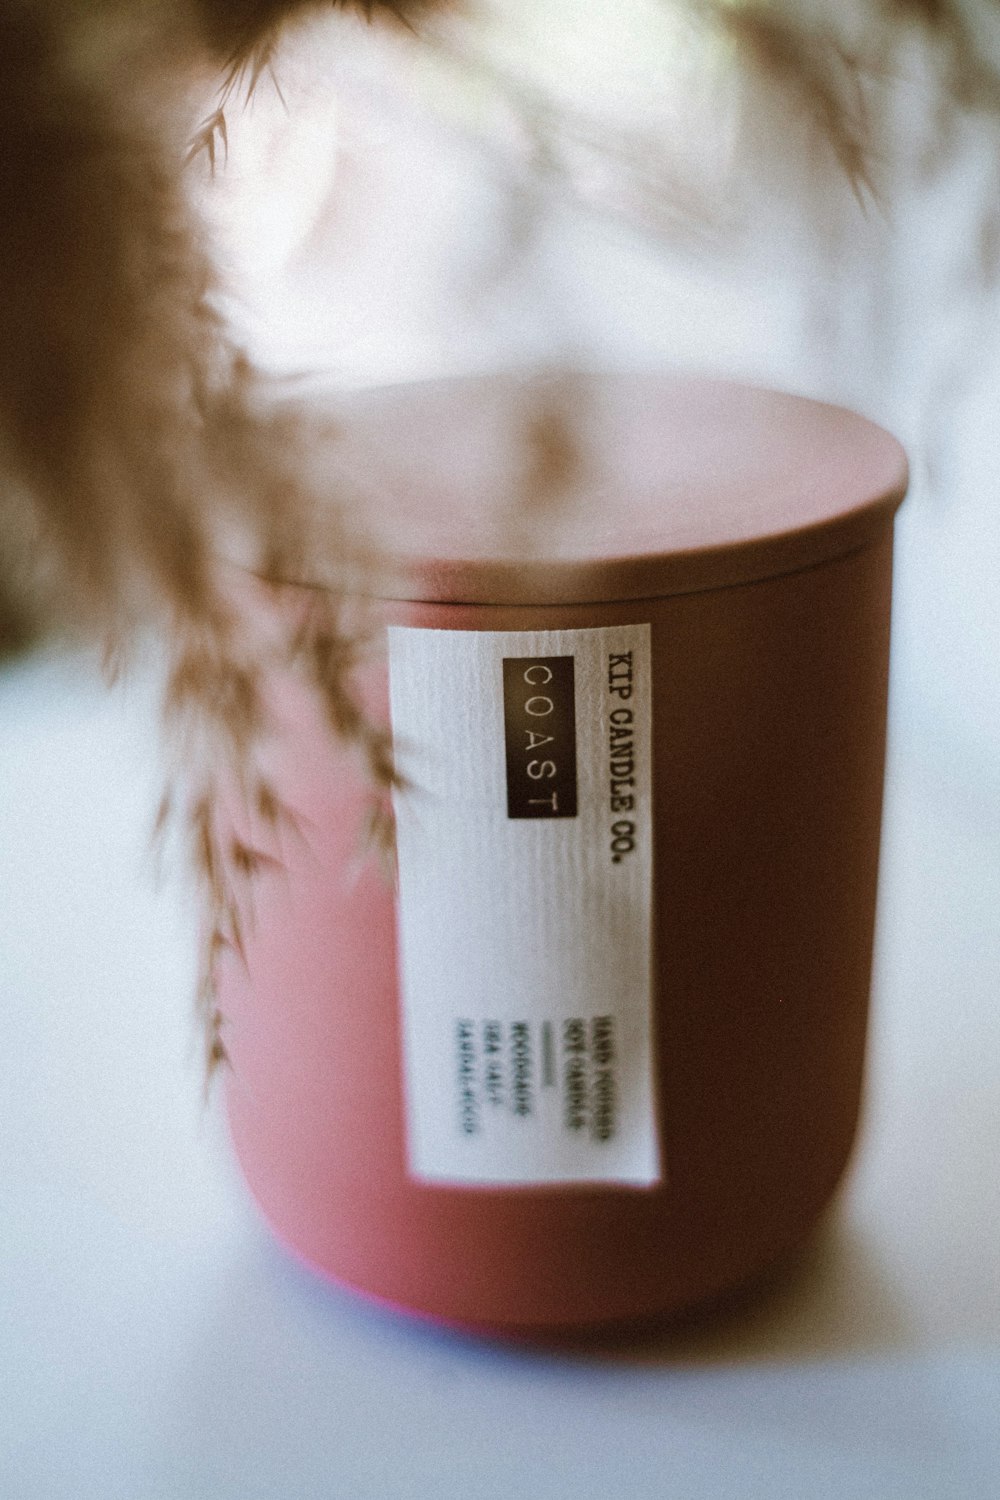 a close up of a pink container with a label on it